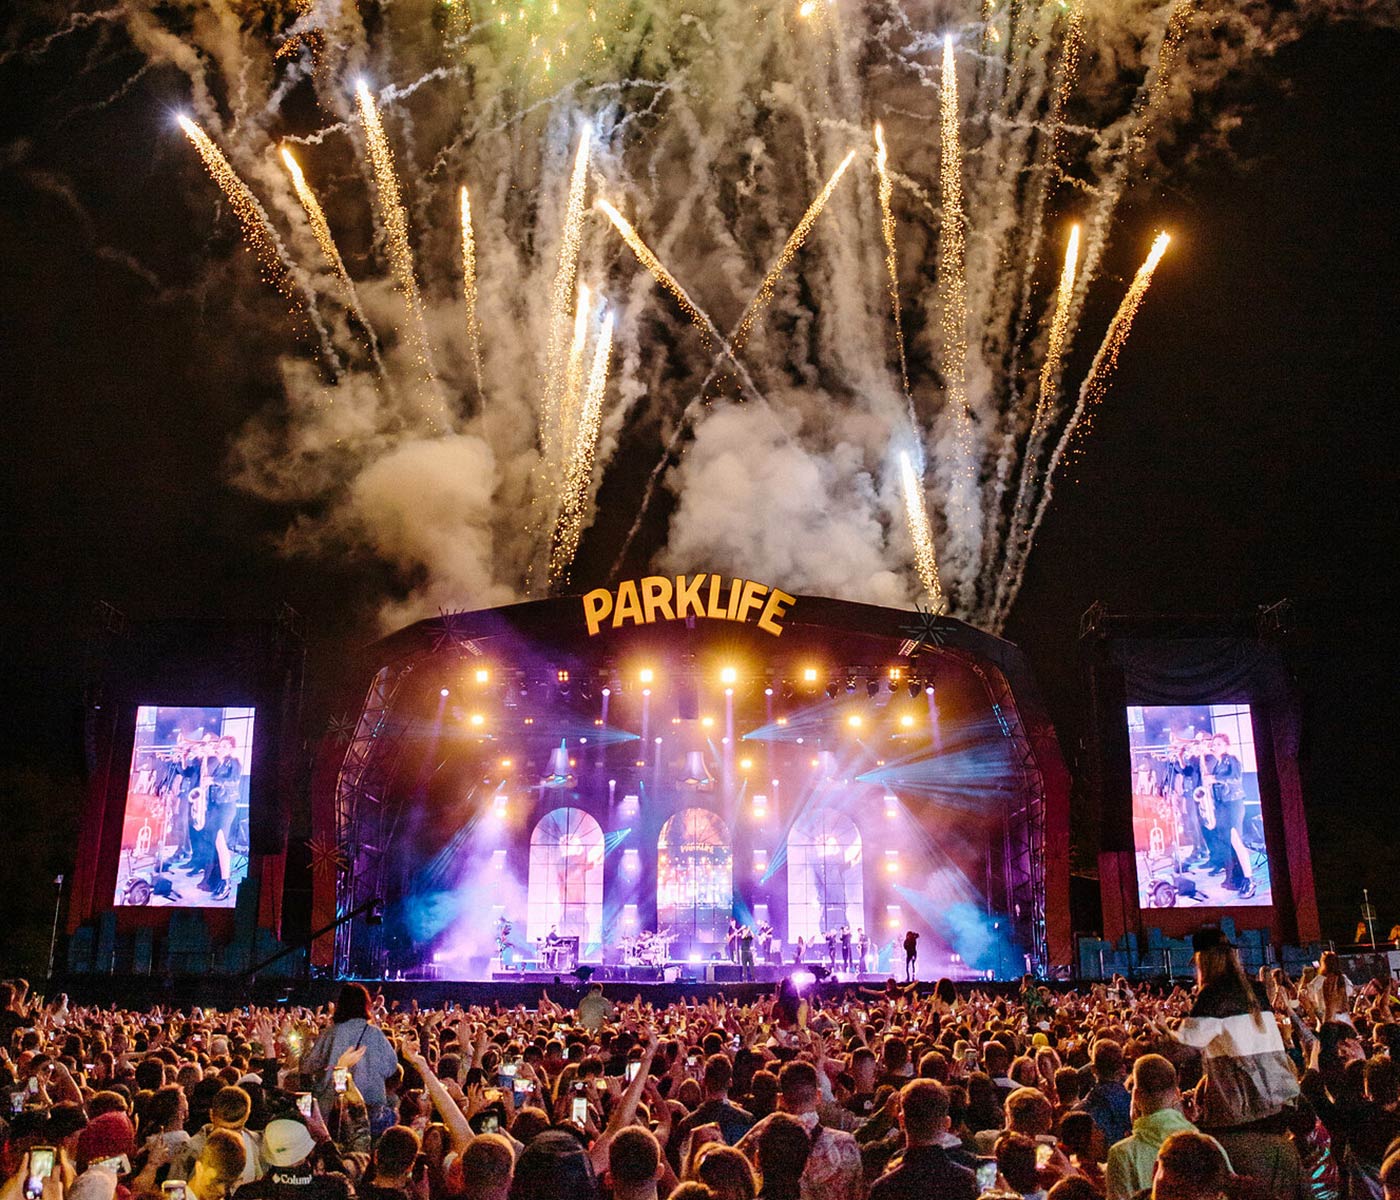 Parklife main stage with fireworks